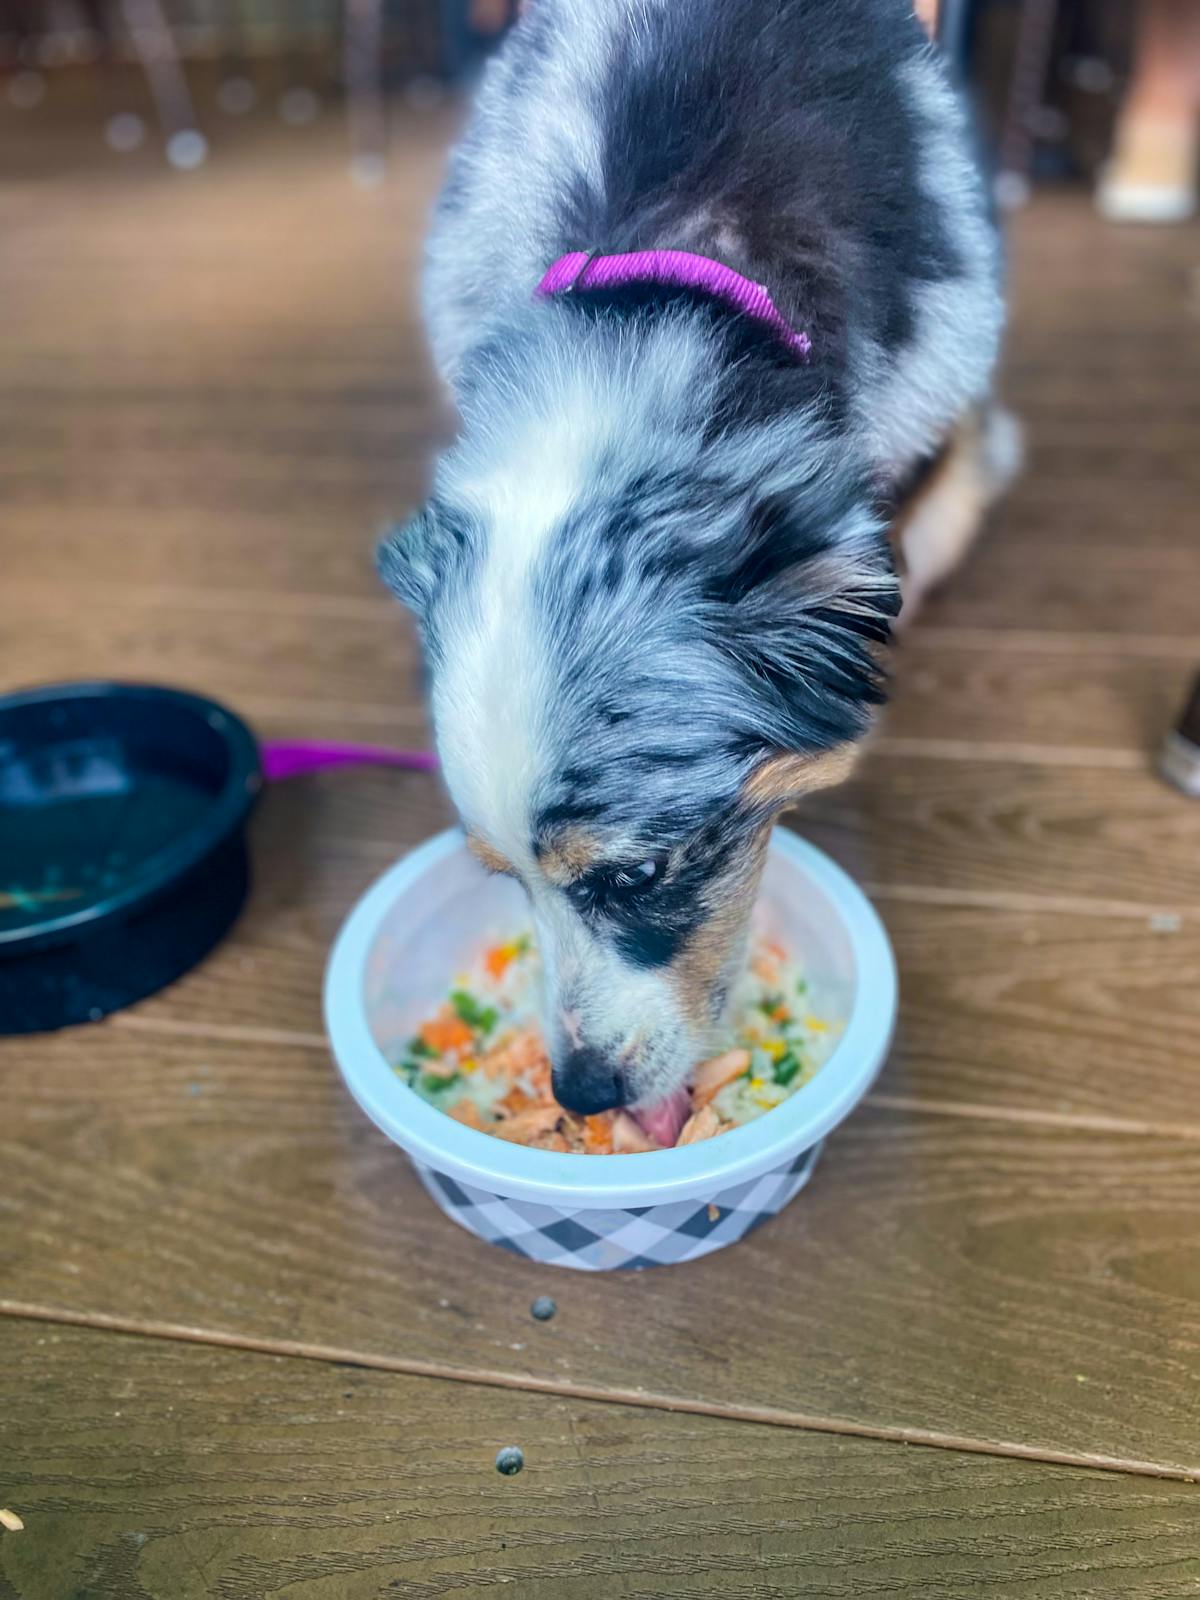 a dog is eating from a bowl on a table